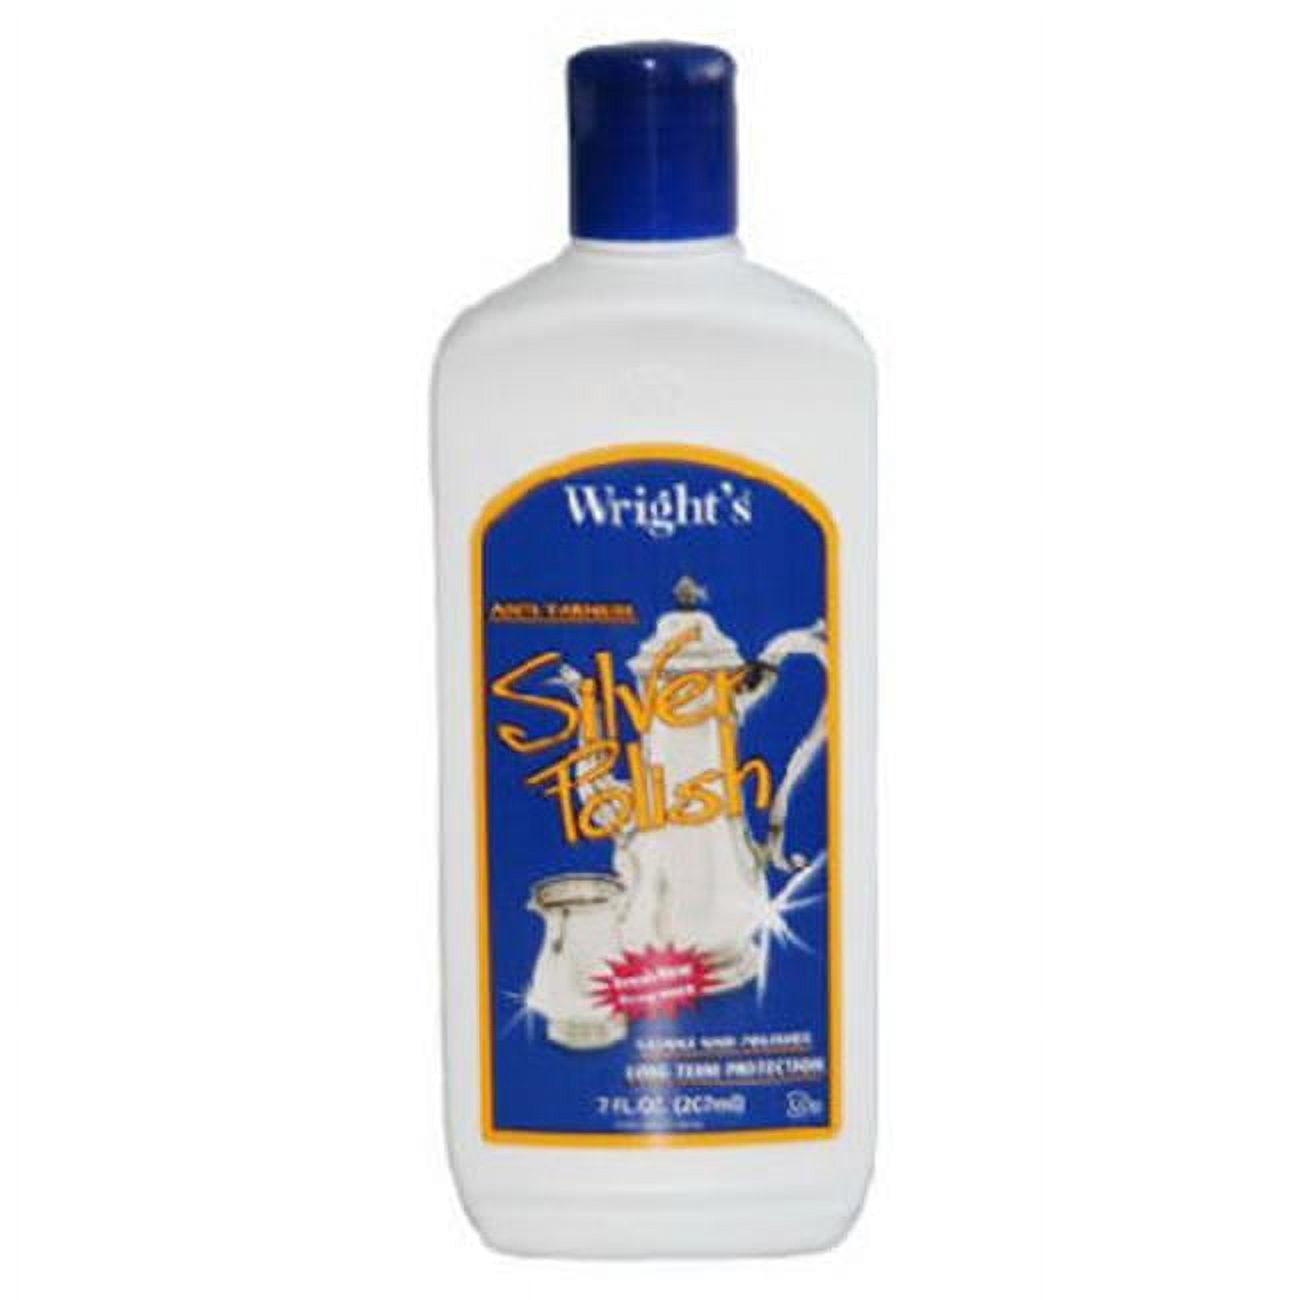 WRIGHTS - SILVER CREAM - Polish - CLEANS Shines and RESTORES - 8